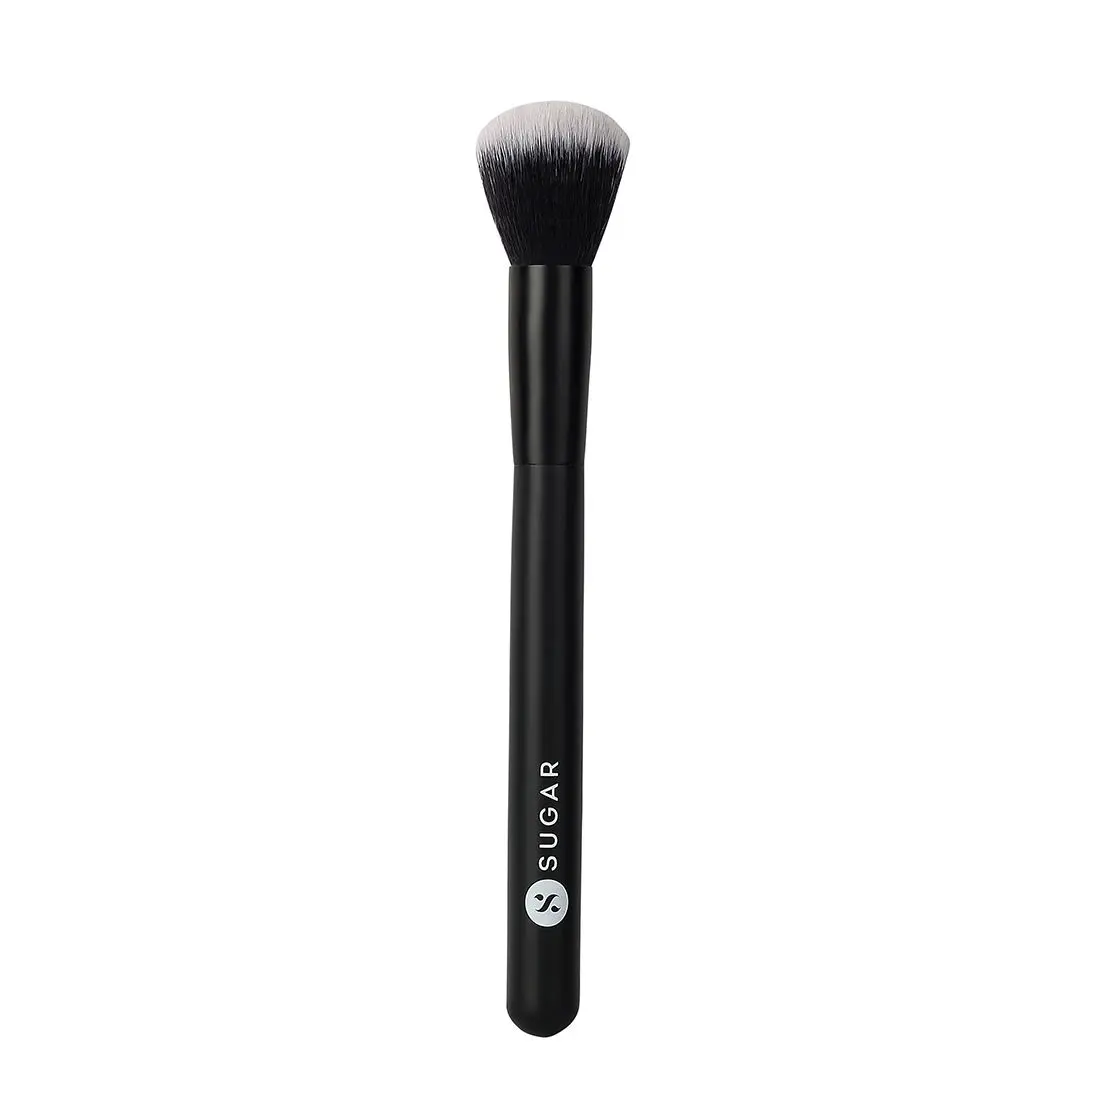 SUGAR Cosmetics - Blend Trend - 001 Blush Brush (Brush For Easy Application of Blush) - Soft, Synthetic Bristles and Wooden Handle